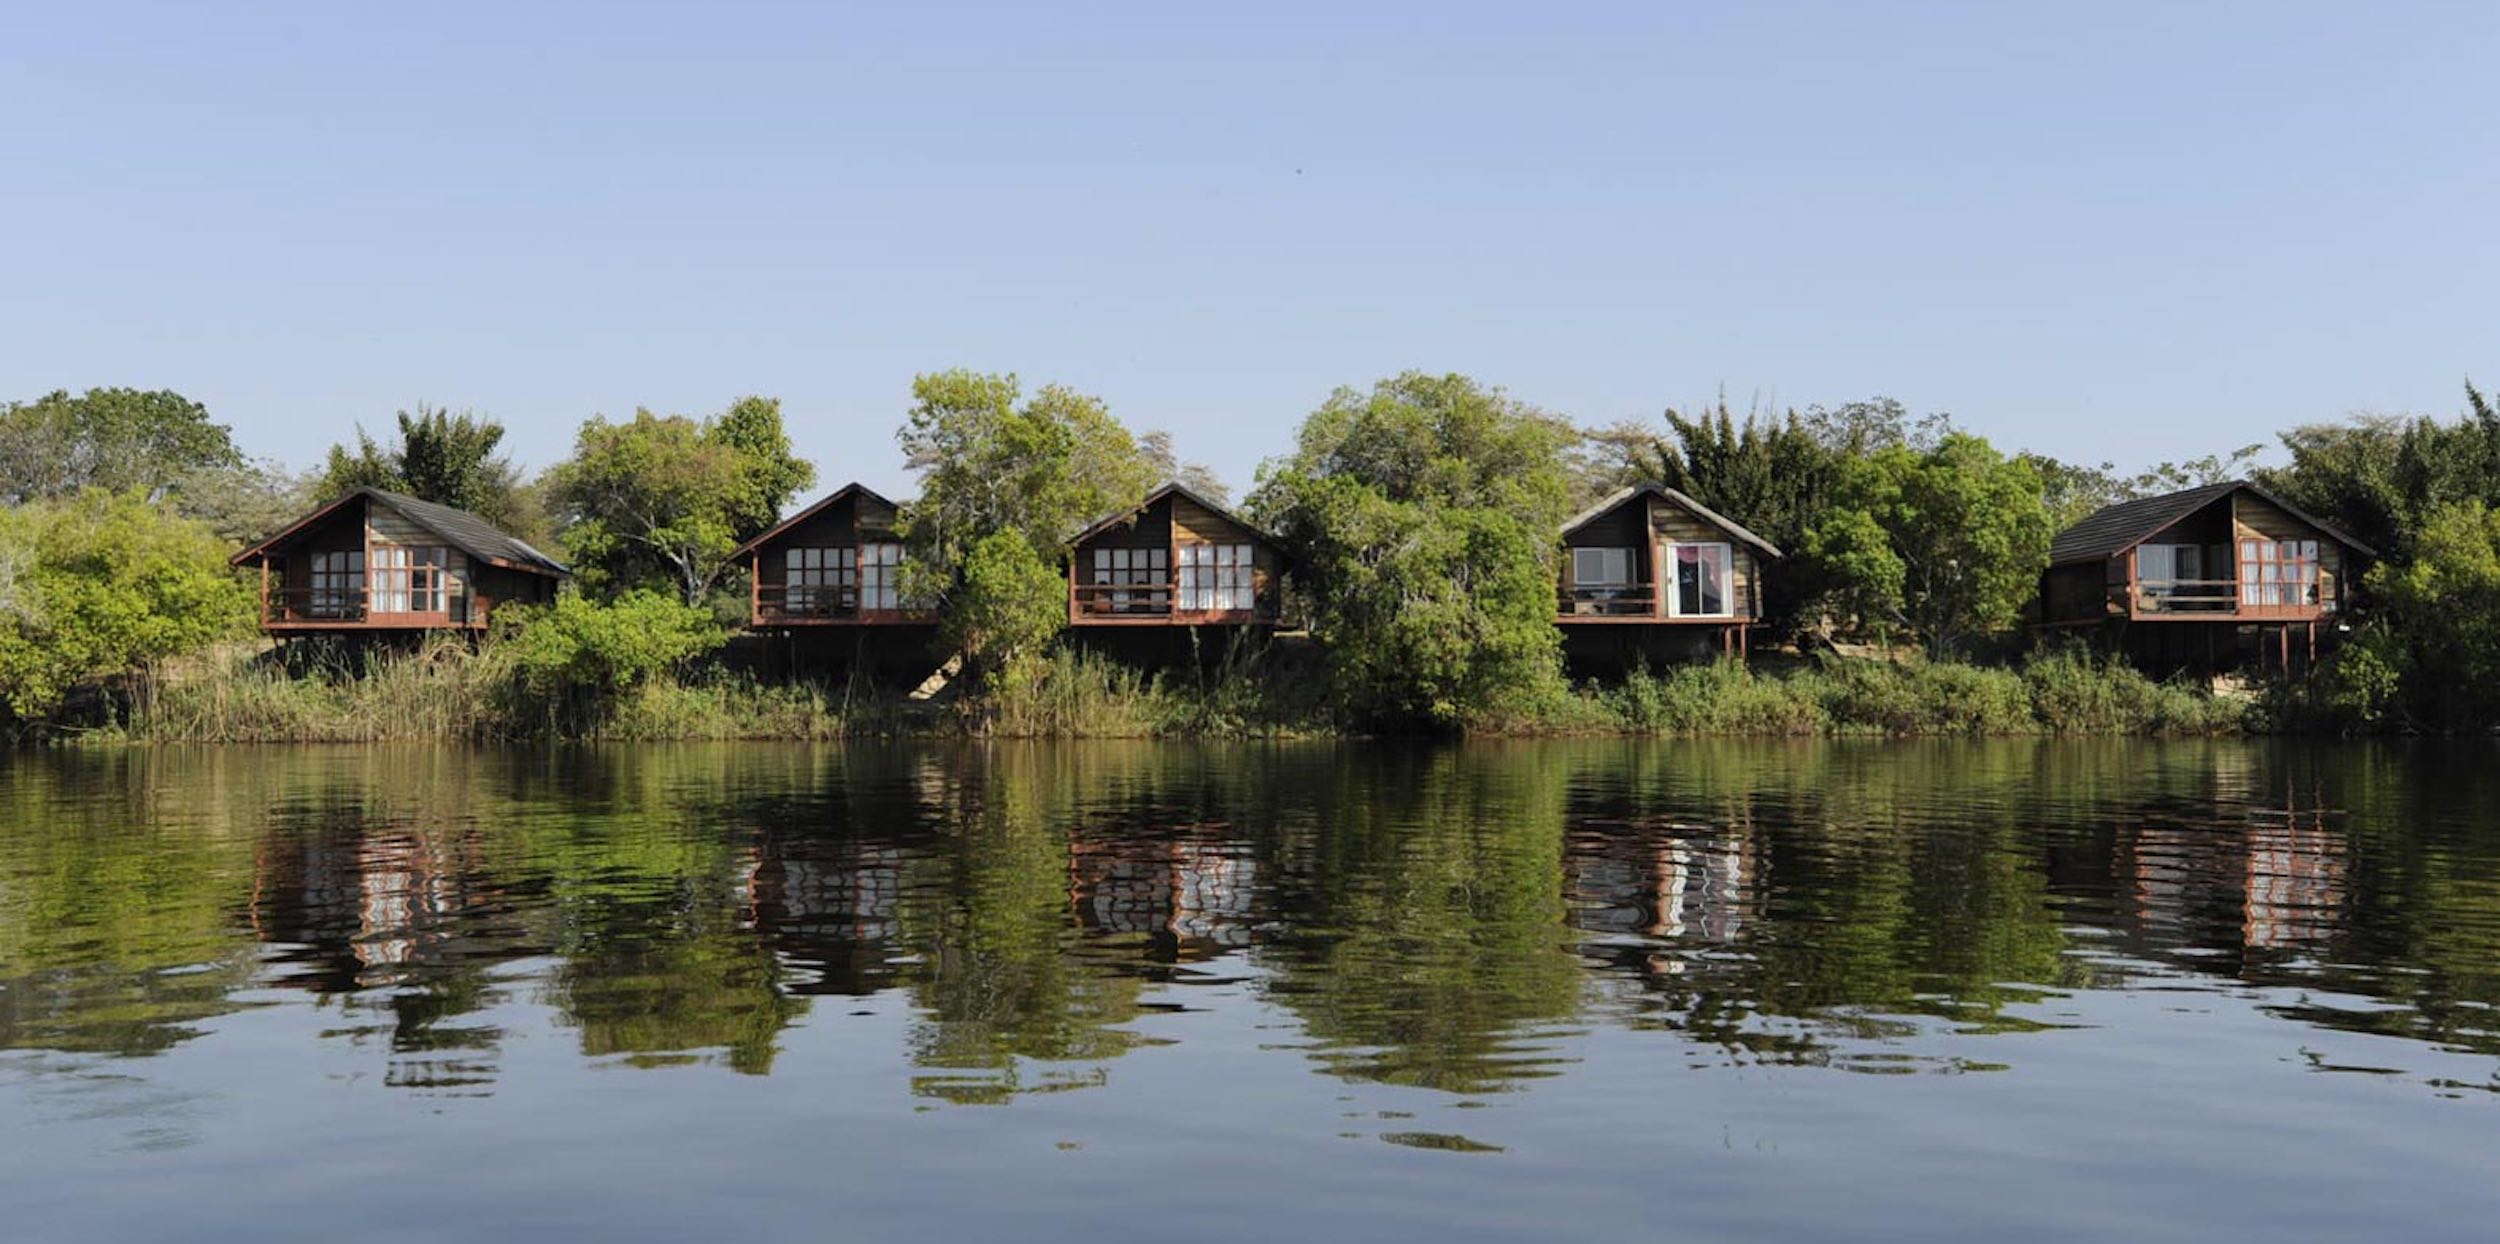 Luxury chalets peer out from amongst lush greenery overlooking the river.